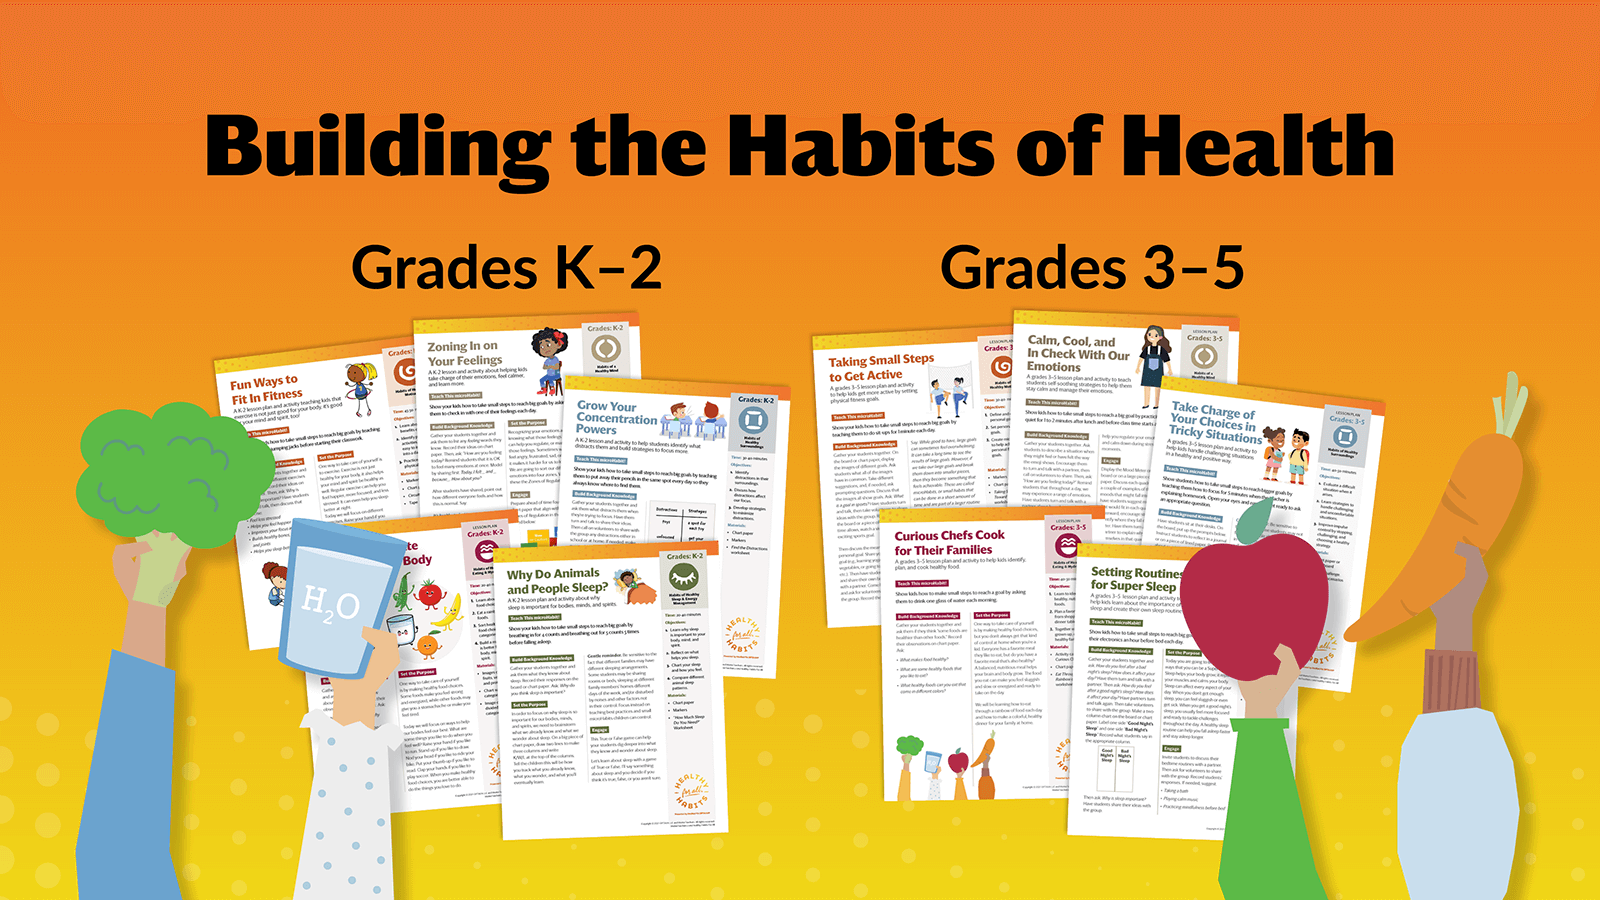 Building the Habits of Health Image